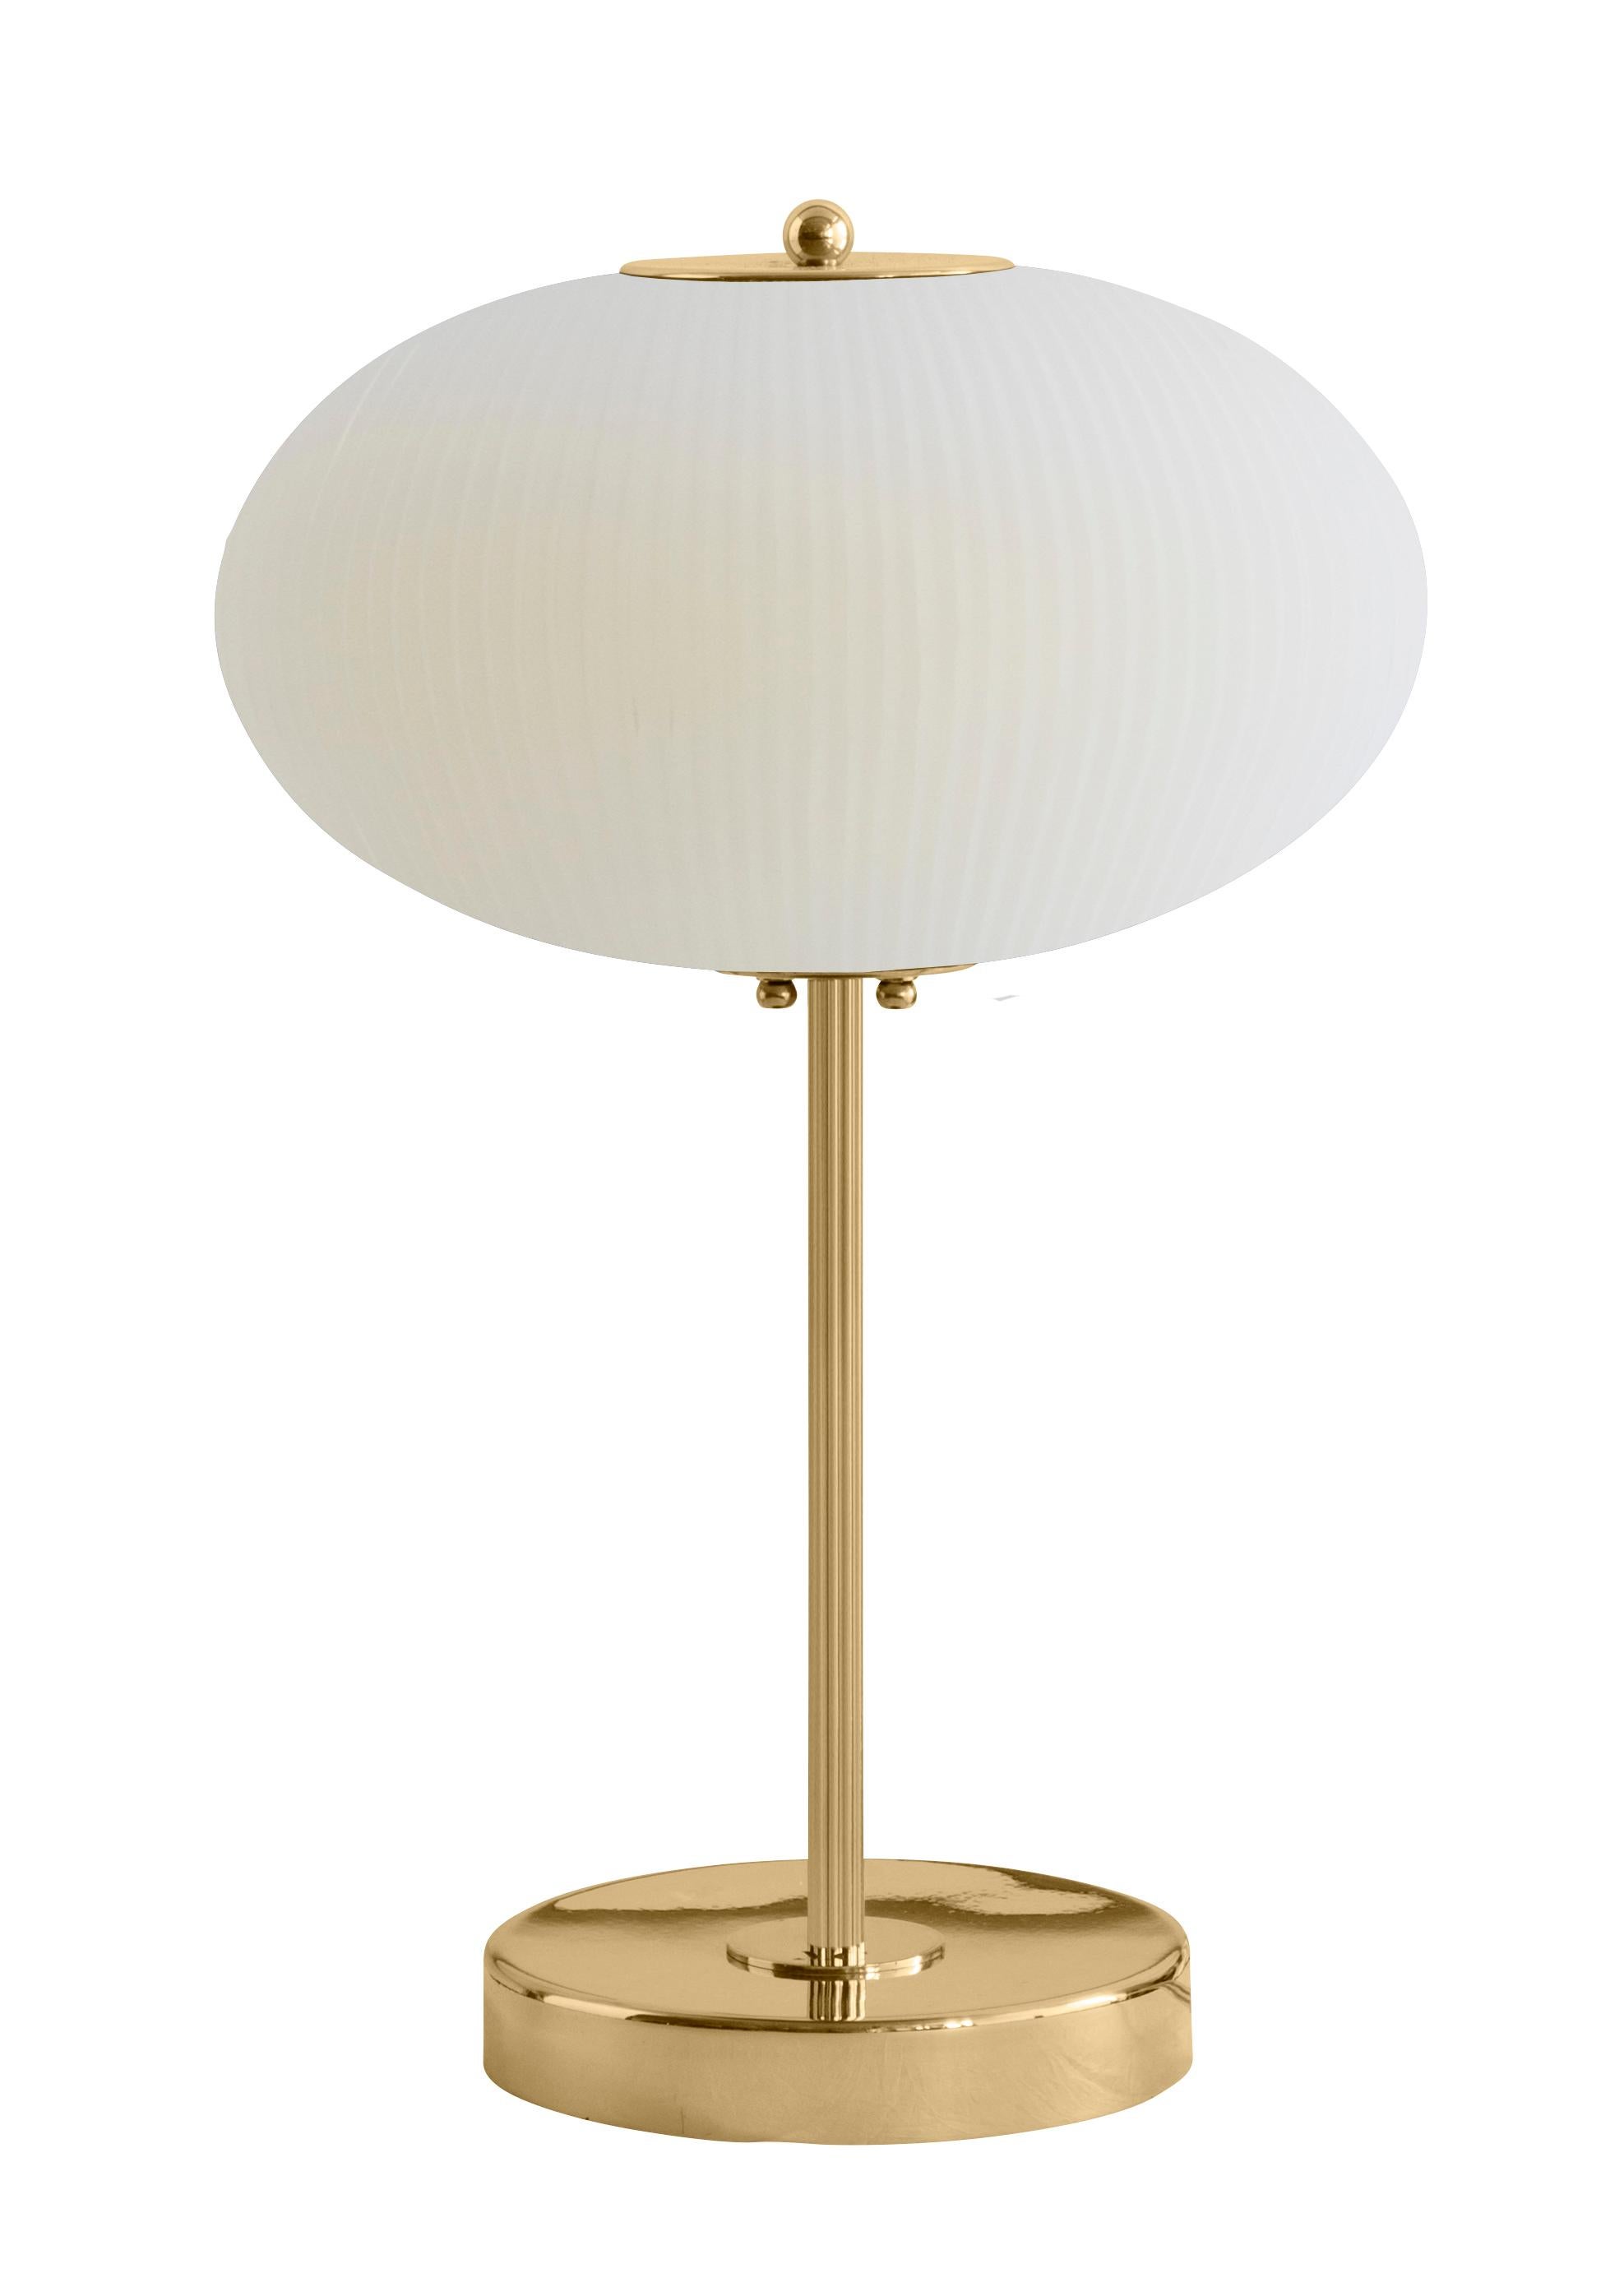 Table lamp china 07 by Magic Circus Editions
Dimensions: H 50 x W 32 x D 32 cm
Materials: Brass, mouth blown glass sculpted with a diamond saw
Colour: Enamel soft white

Available finishes: Brass, nickel
Available colours: enamel soft white,